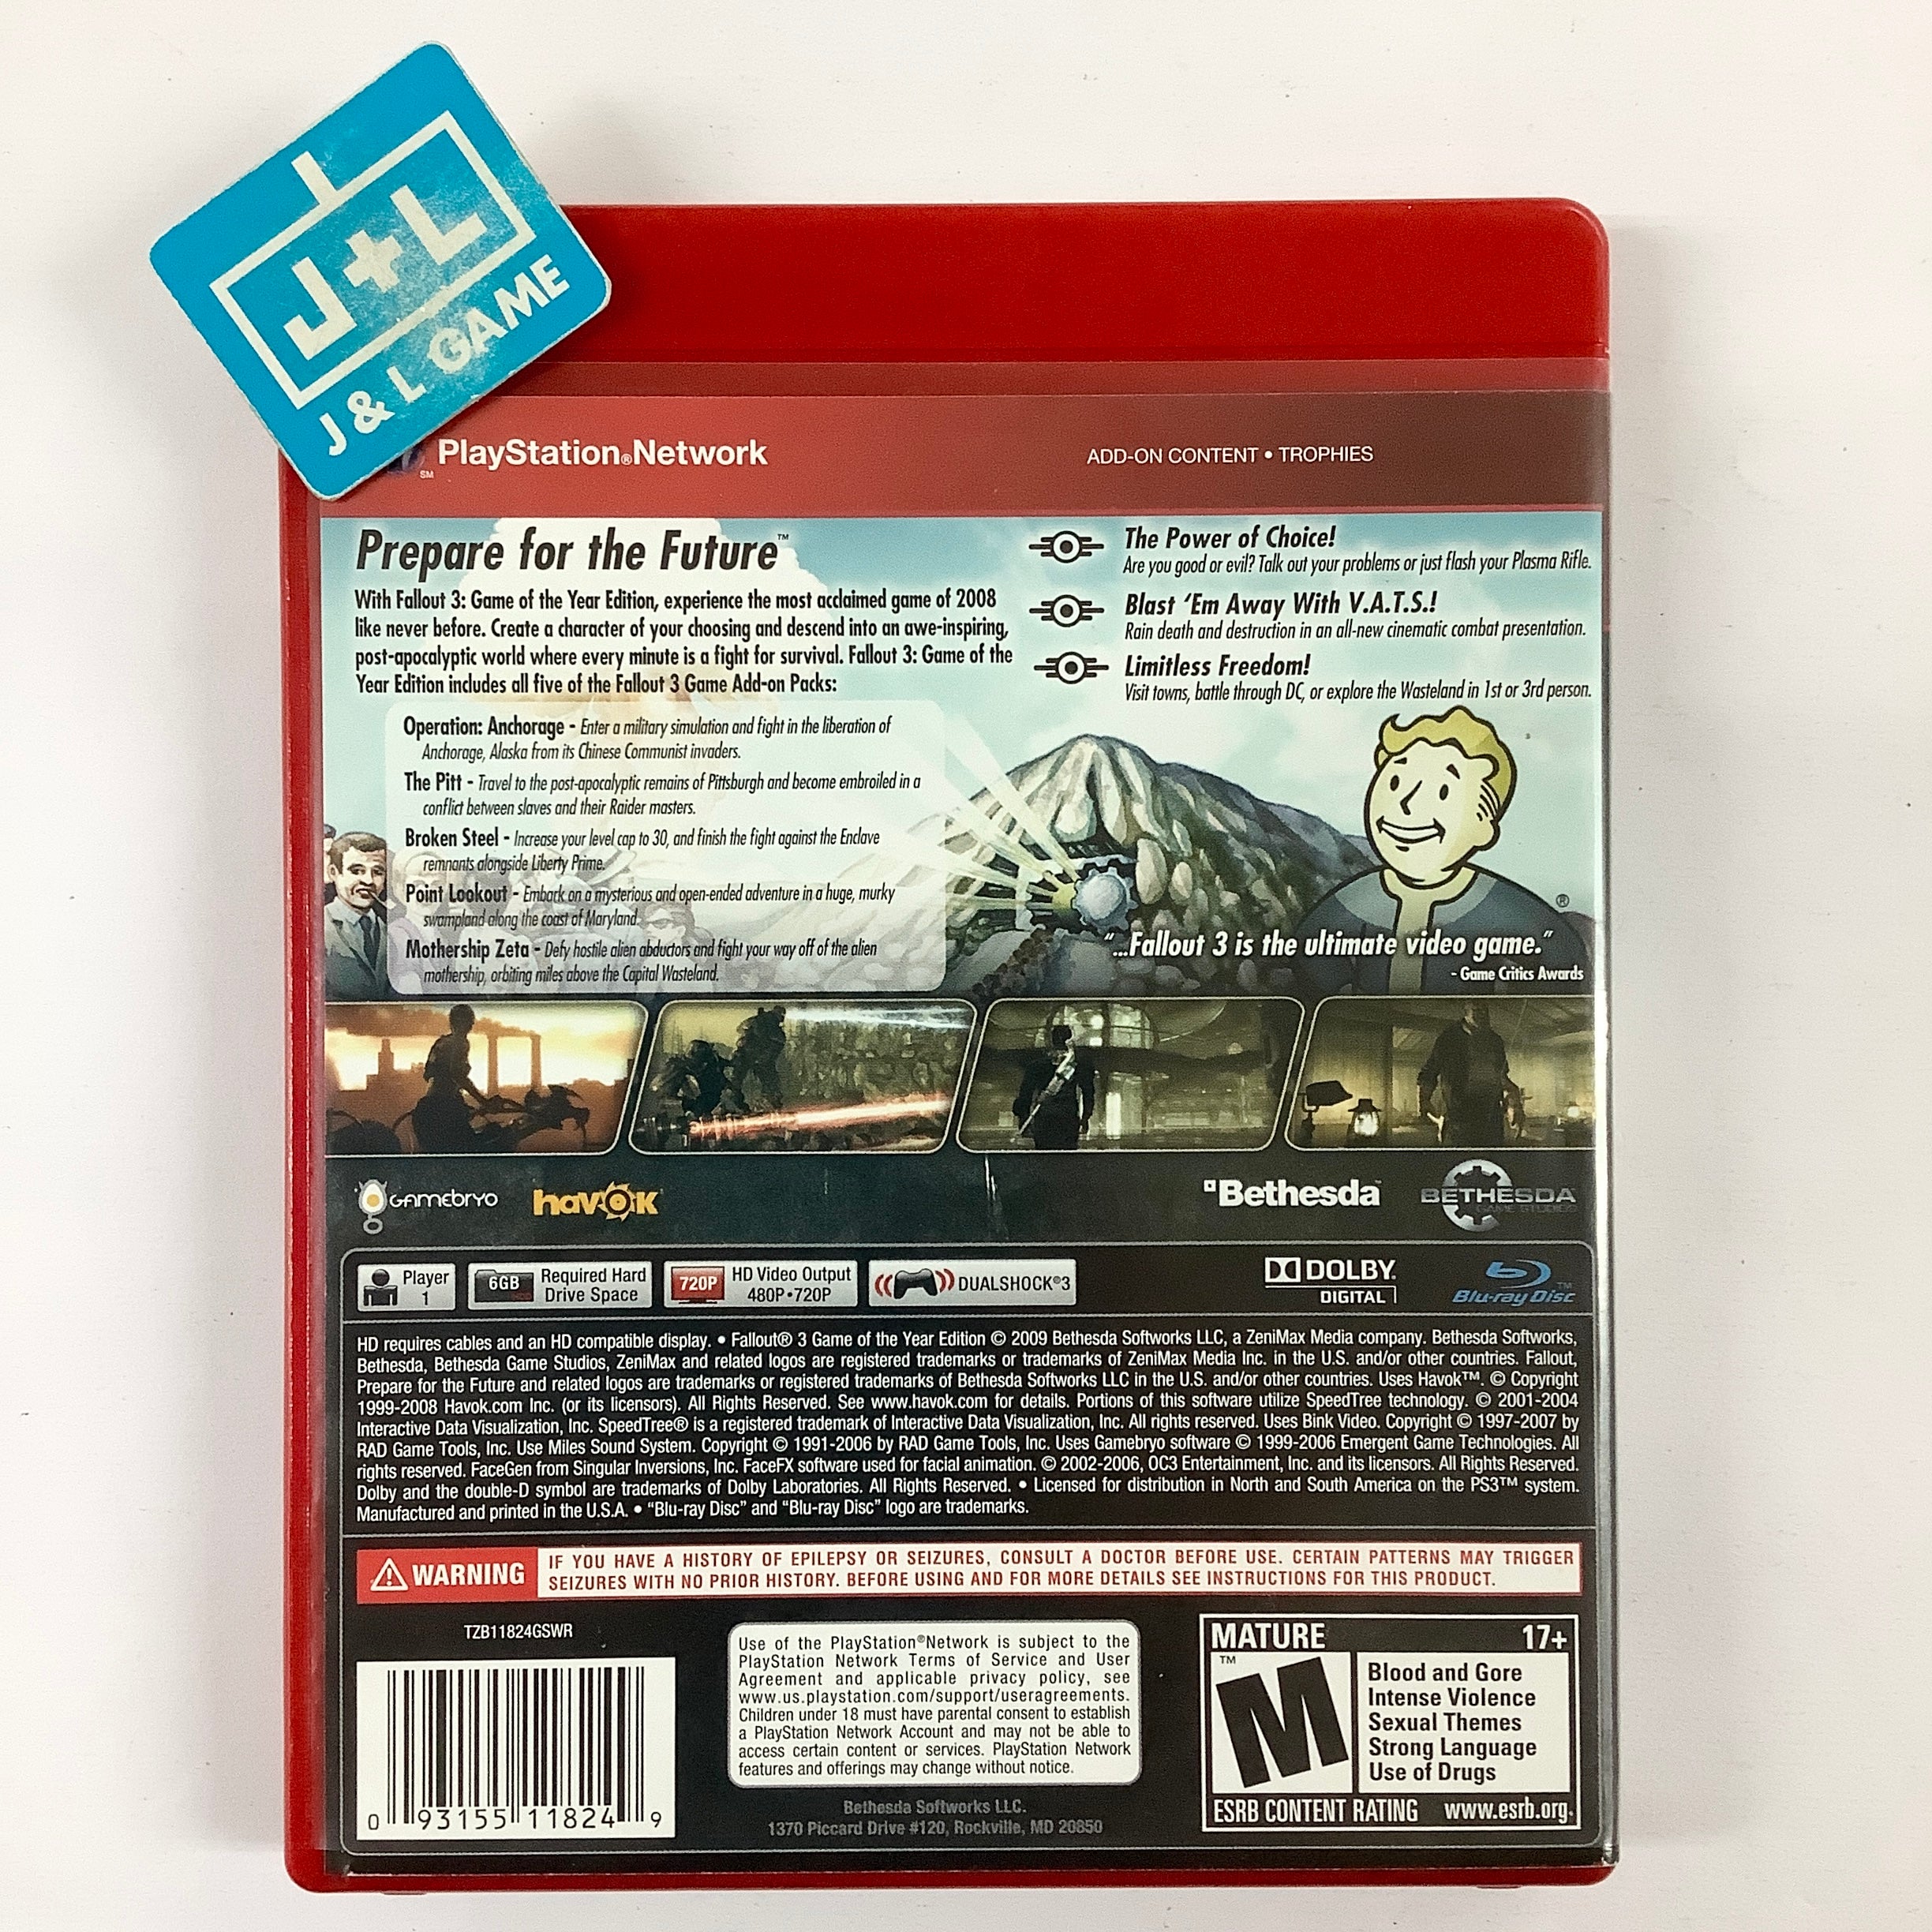 Fallout 3: Game of the Year Edition (Greatest Hits) (GameStop Exclusive) - (PS3) PlayStation 3 [Pre-Owned] Video Games Bethesda Softworks   